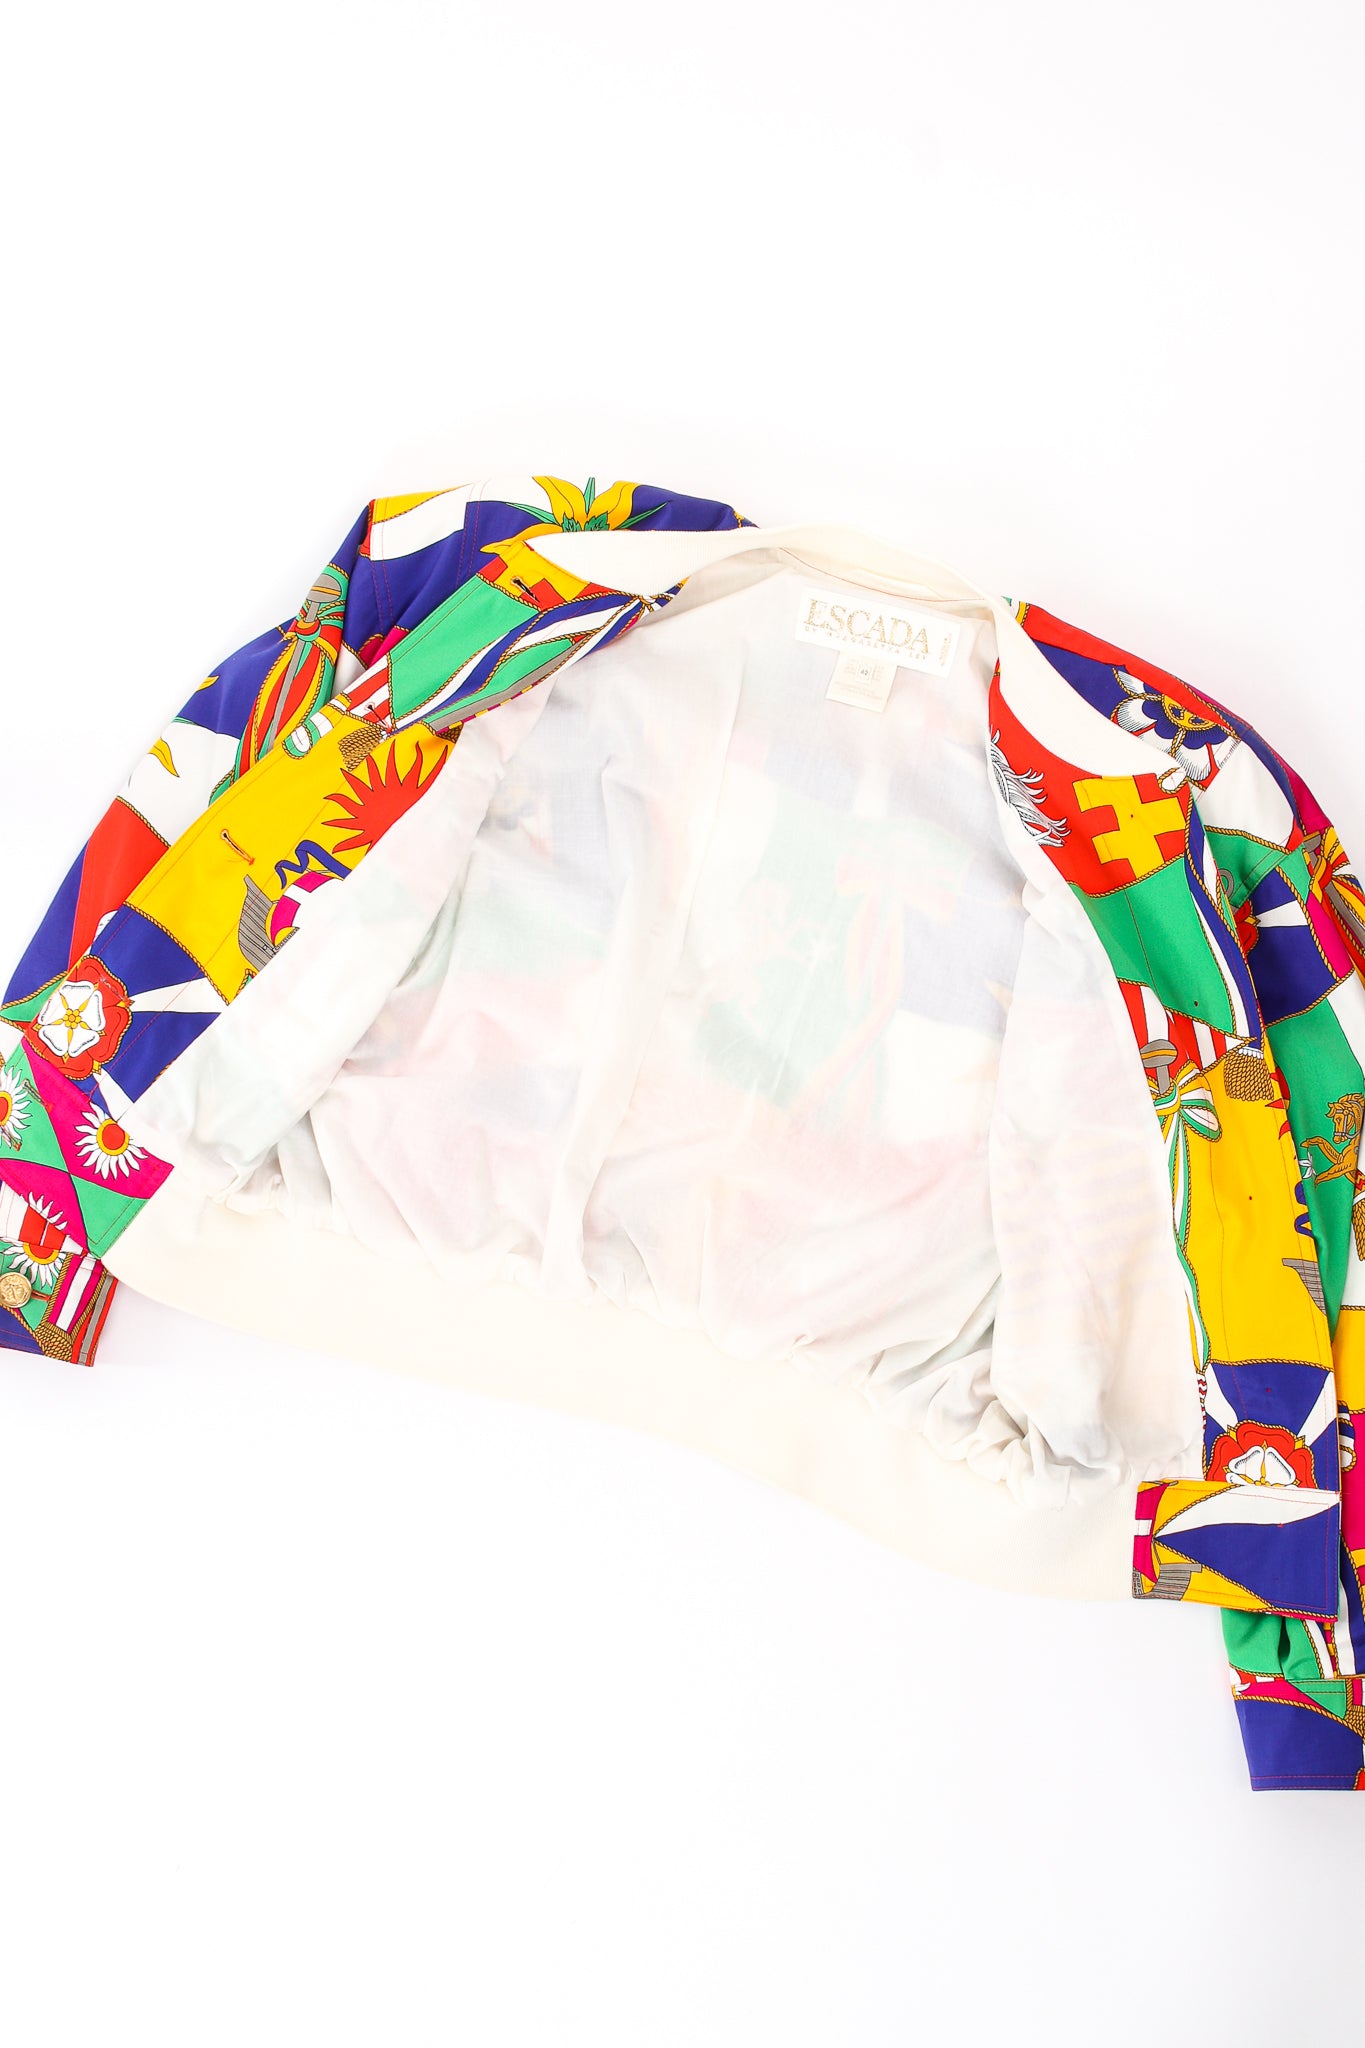 Vintage Escada Flag Pageantry Bomber Jacket flat lining at Recess Los Angeles